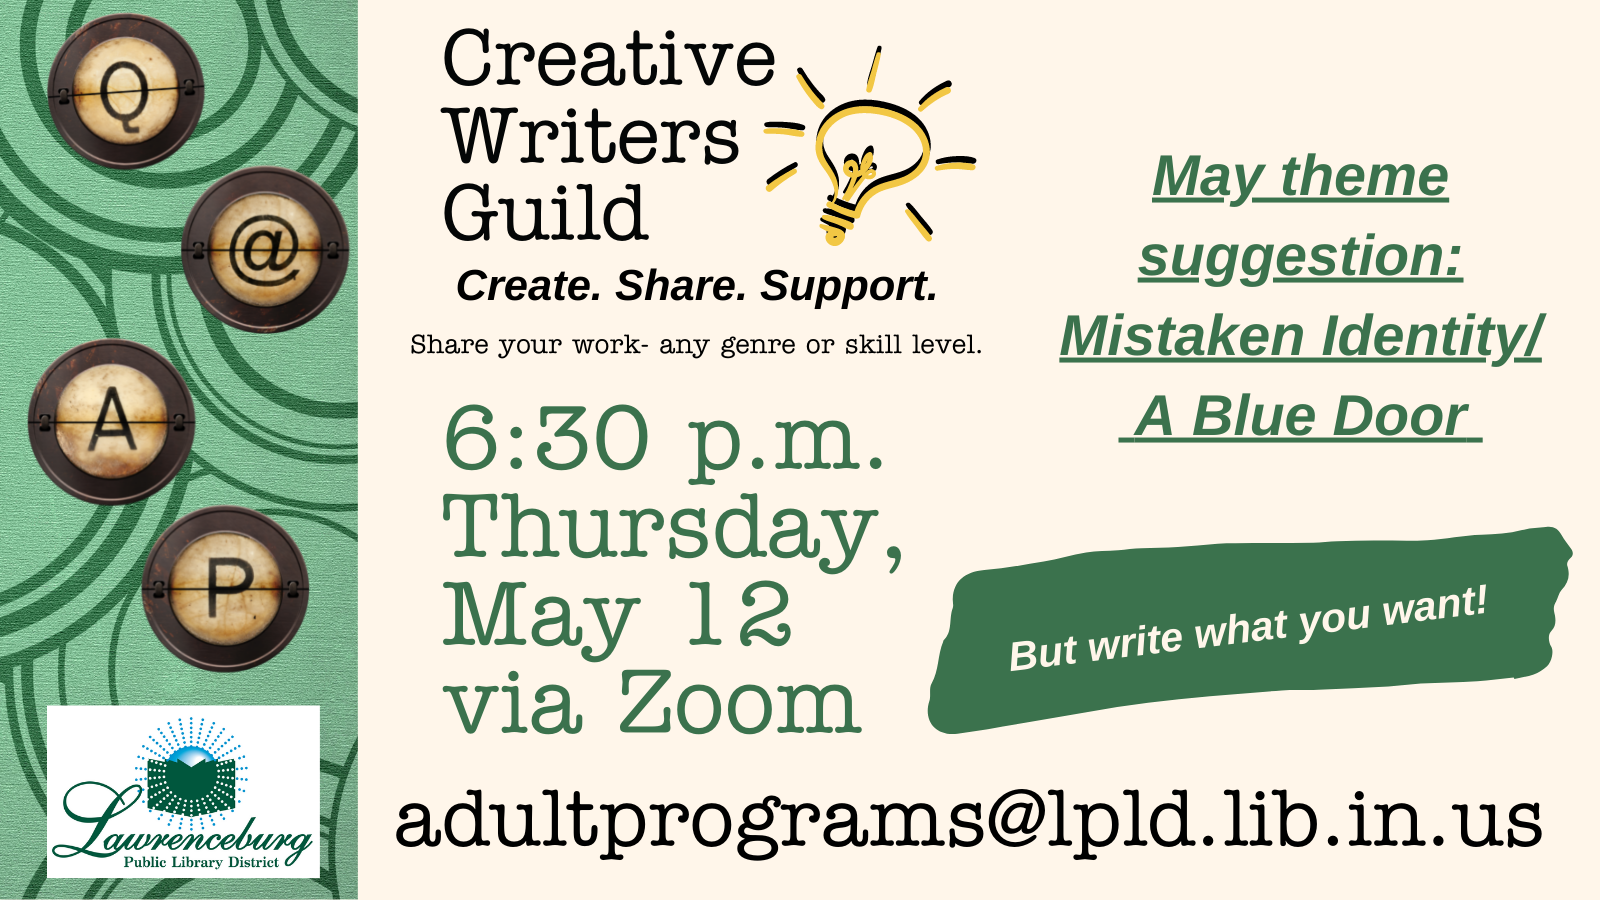 Creative Writers Guild. 6:30 p.m. Thursday, May 12, via Zoom. Must register, include email for Zoom link.